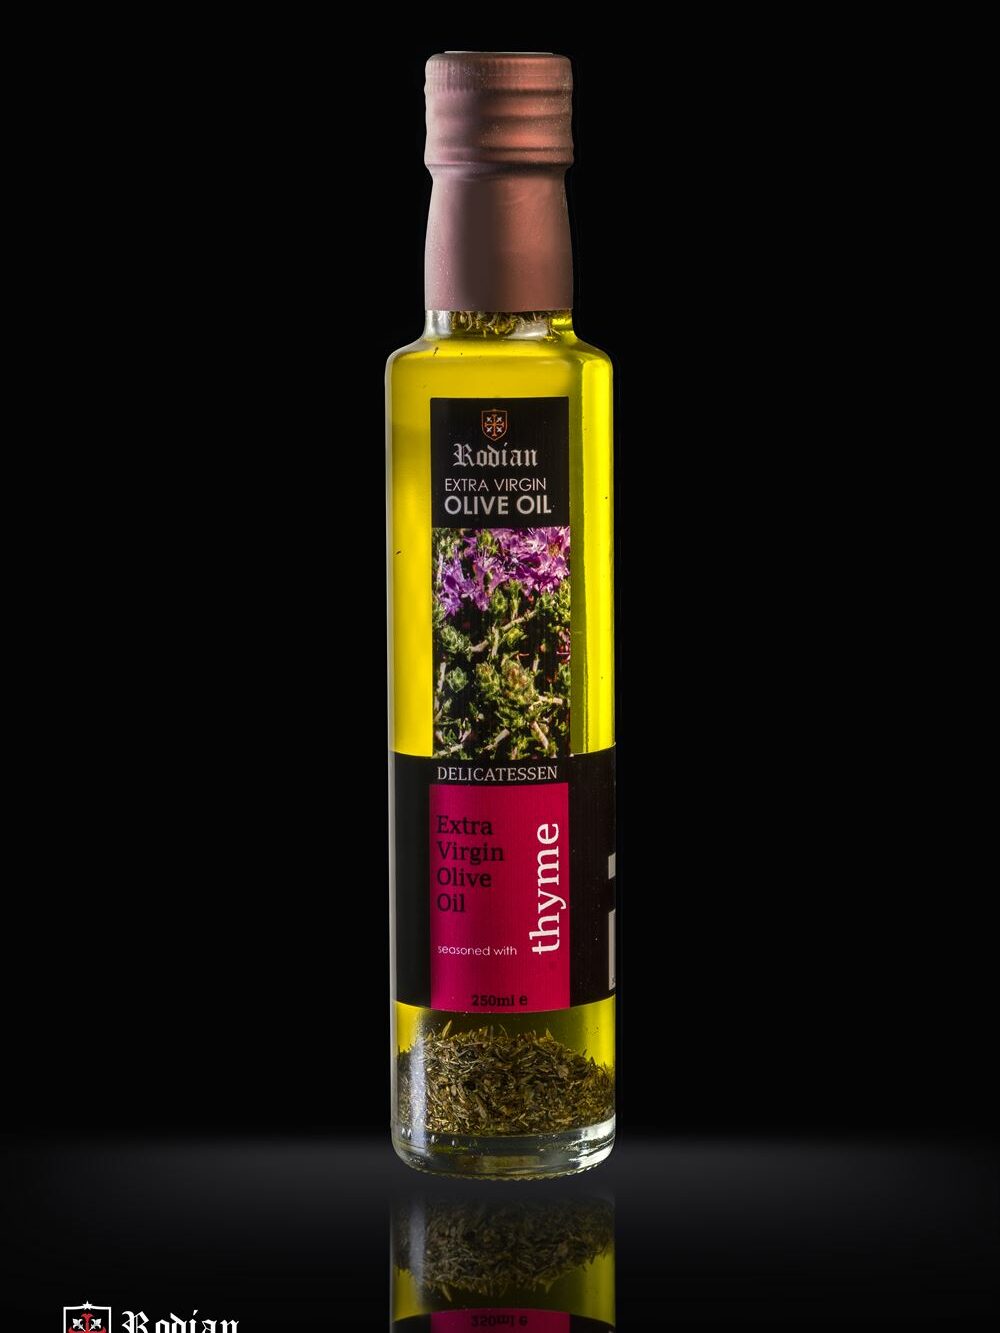 Delicatessen Extra Virgin Olive Oil with Thyme